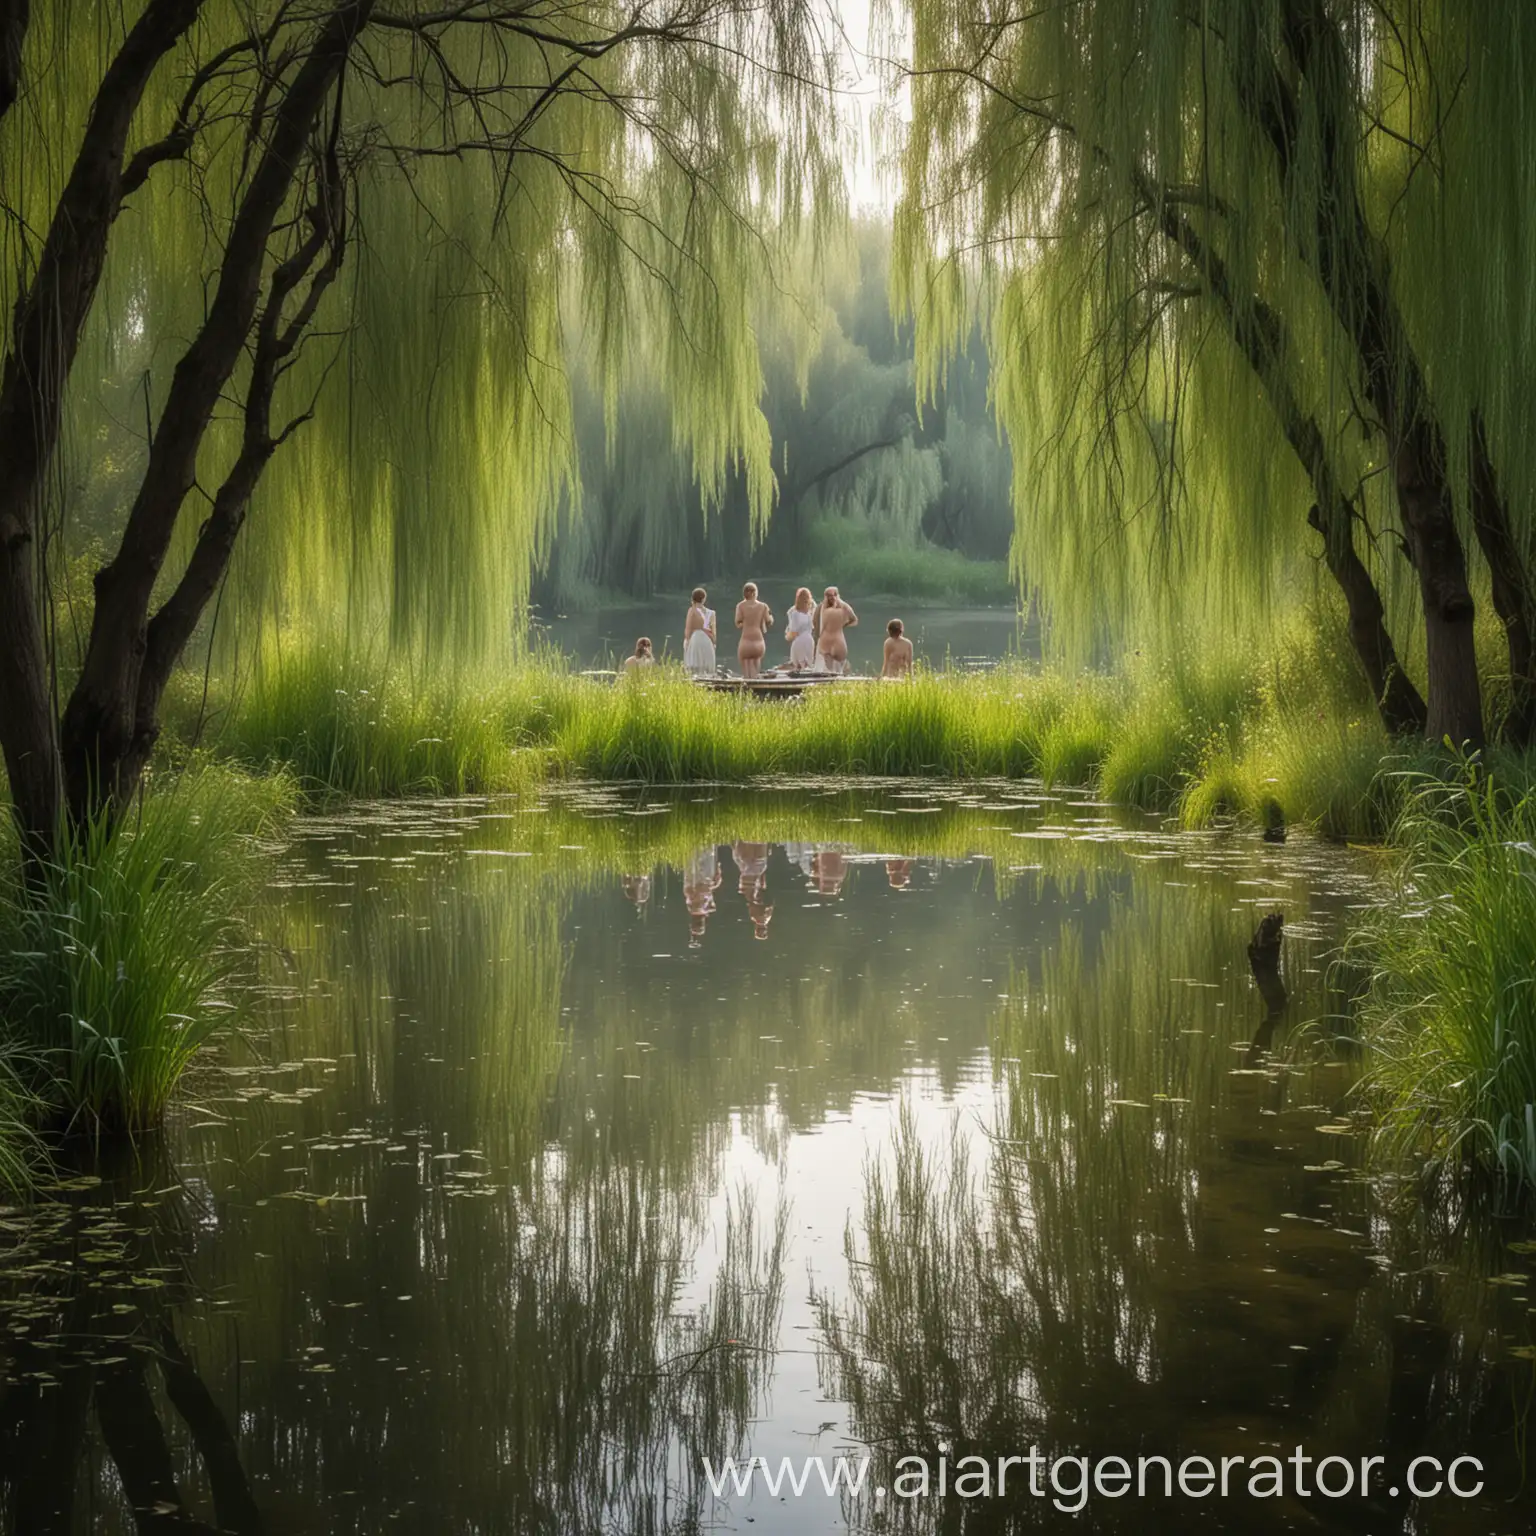 Mystical morning landscape with a pond surrounded by willows and five women bathing in the pond and looking at us.